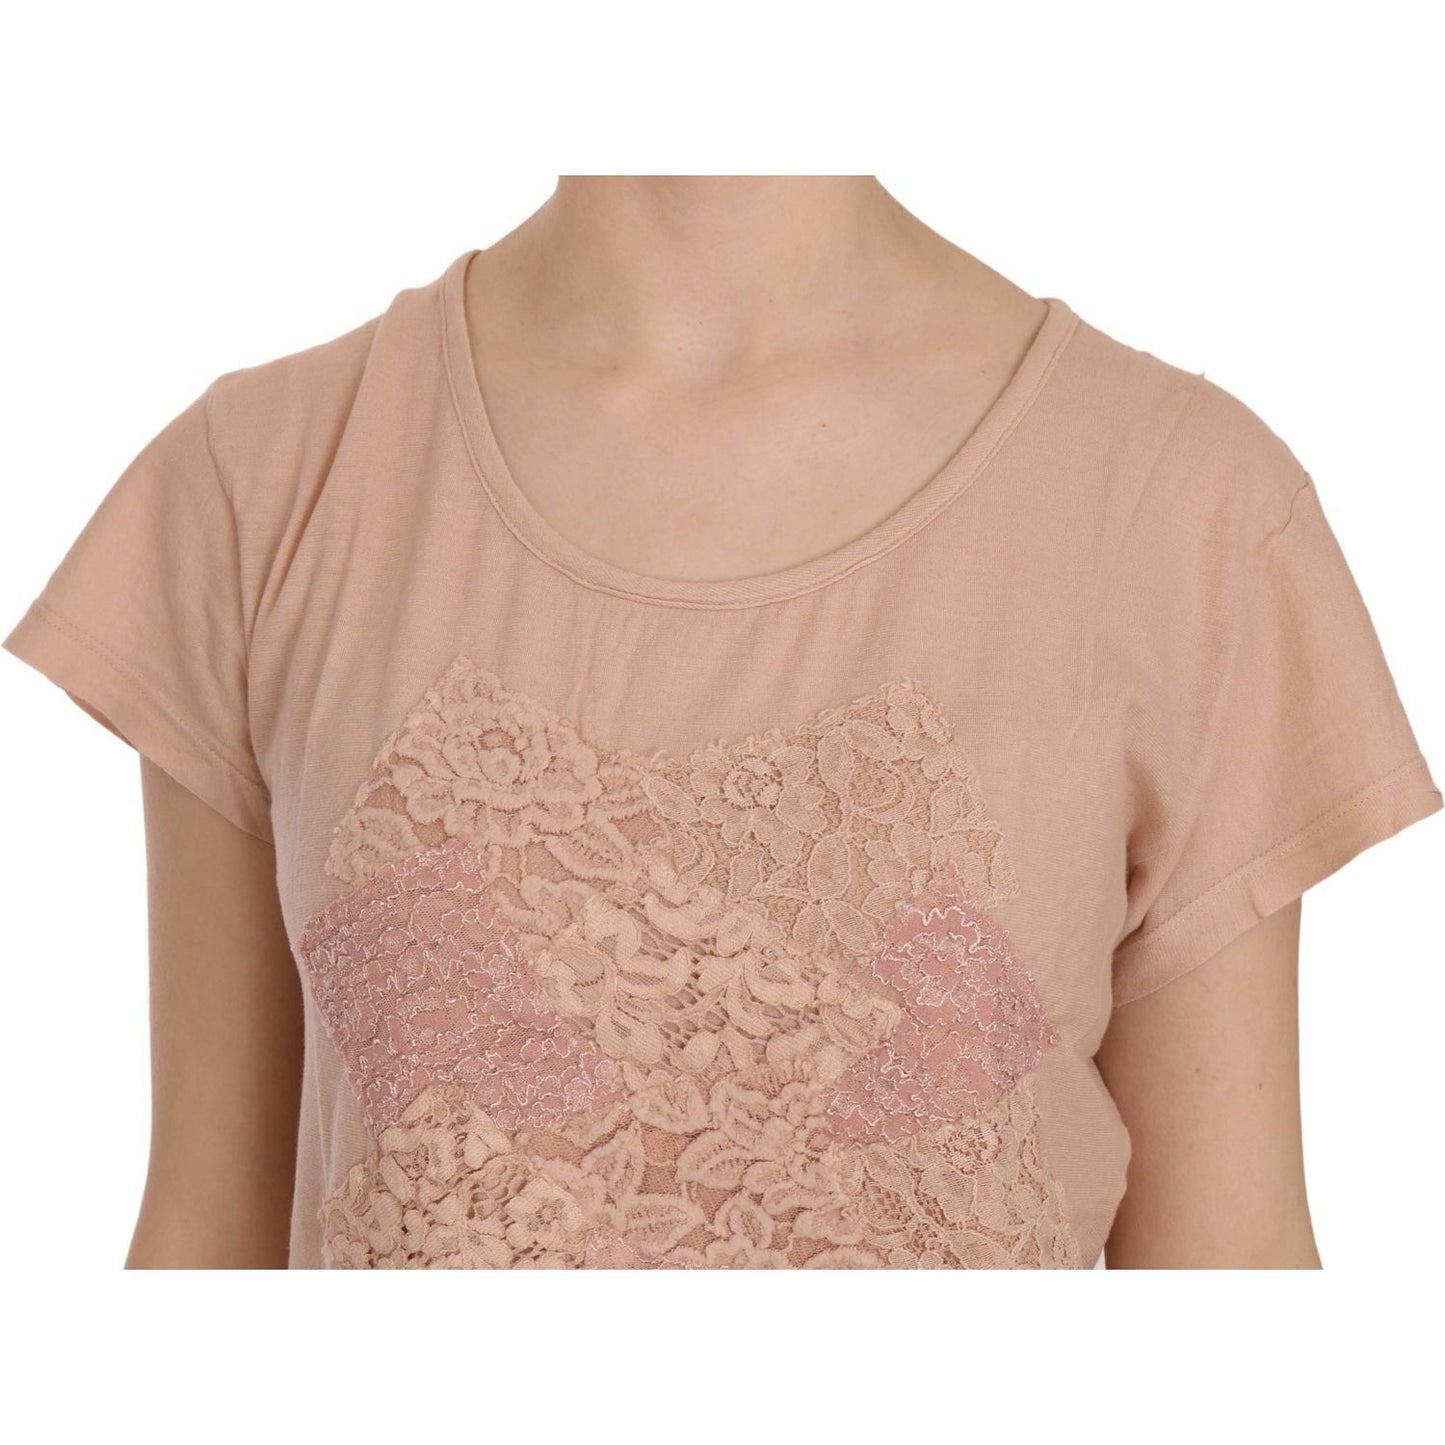 PINK MEMORIES Elegant Cream Lace Round Neck Blouse pink-cream-lace-short-sleeve-shirt-top-cotton-blouse IMG_2803-scaled-2a989a67-418.jpg